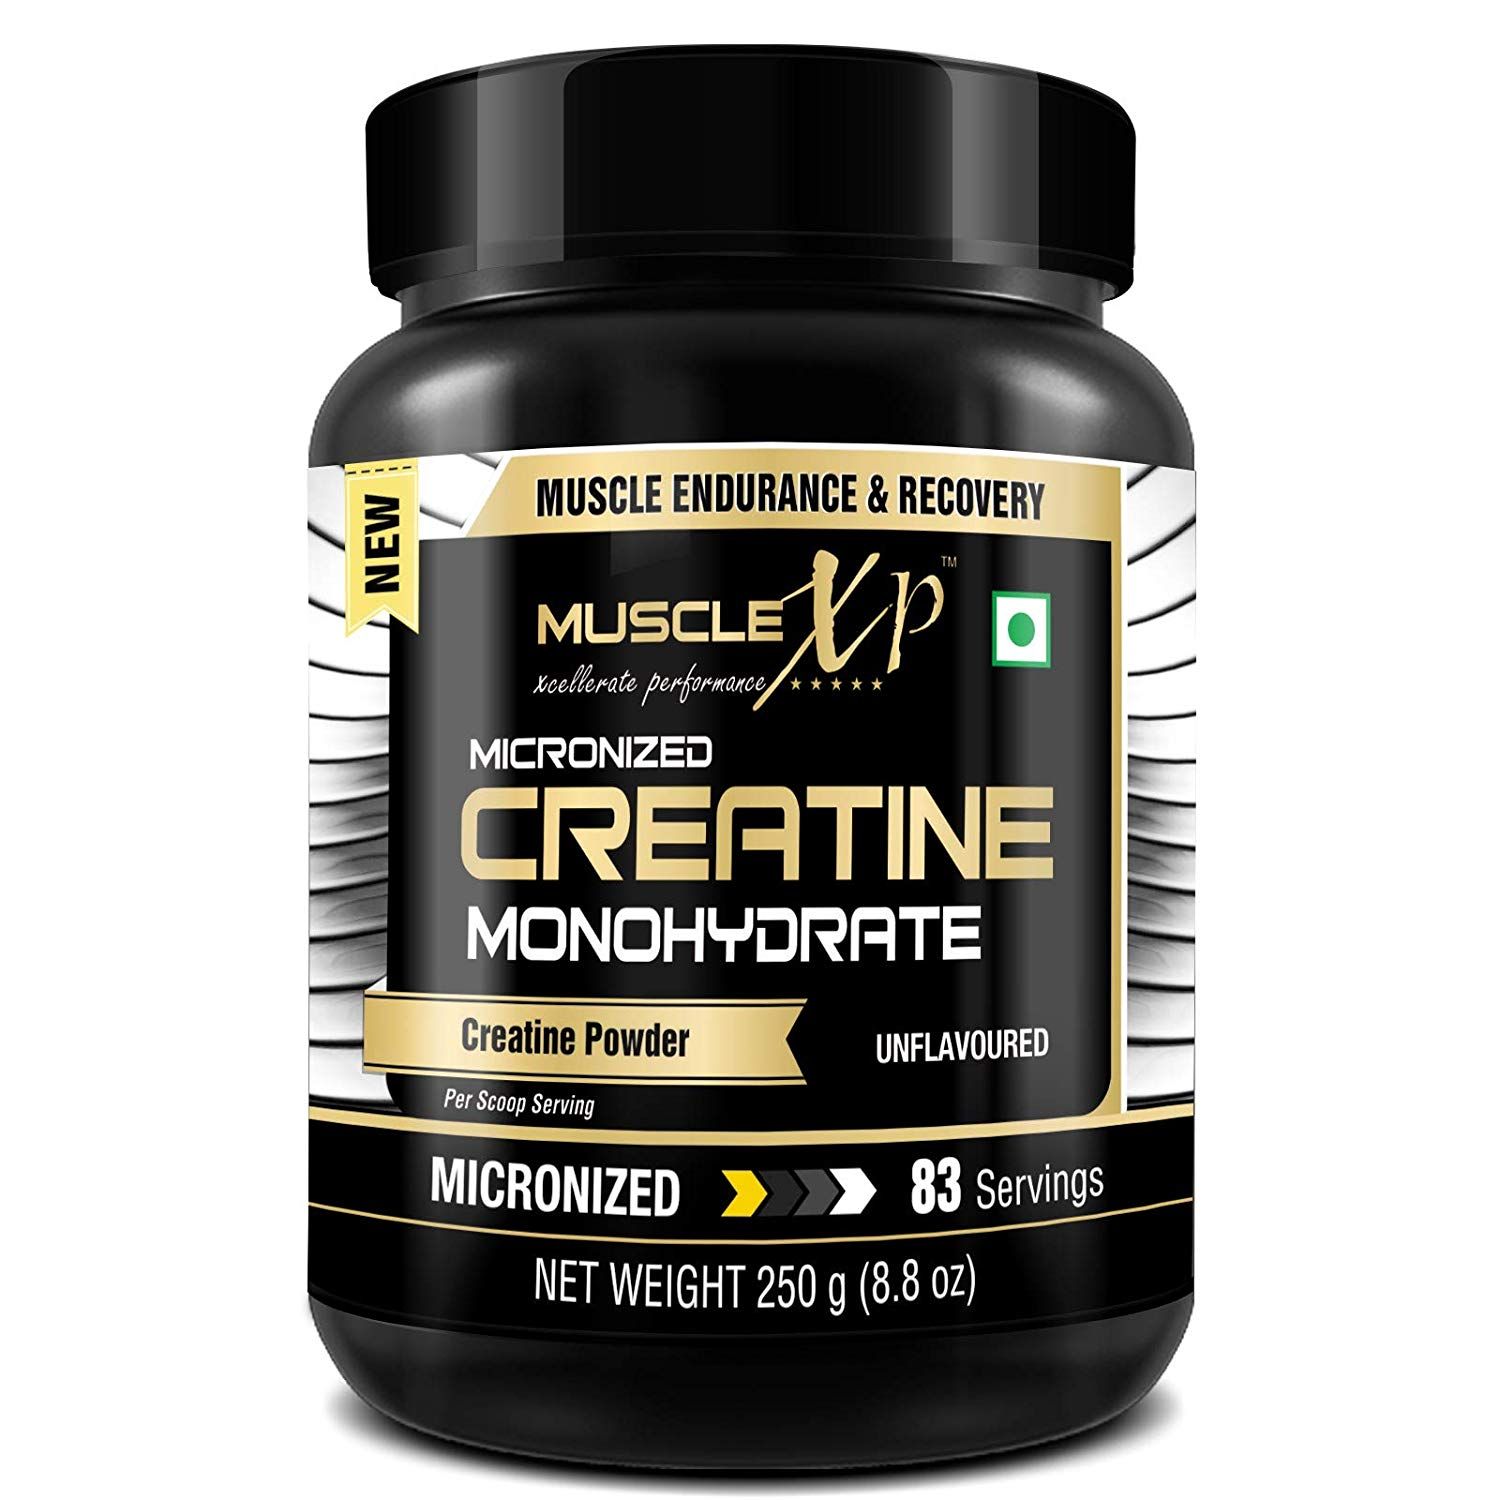 Buy MuscleXP Micronized Creatine Monohydrate Powder Unflavored, 250g (8.8oz) - 83 Servings - Purplle